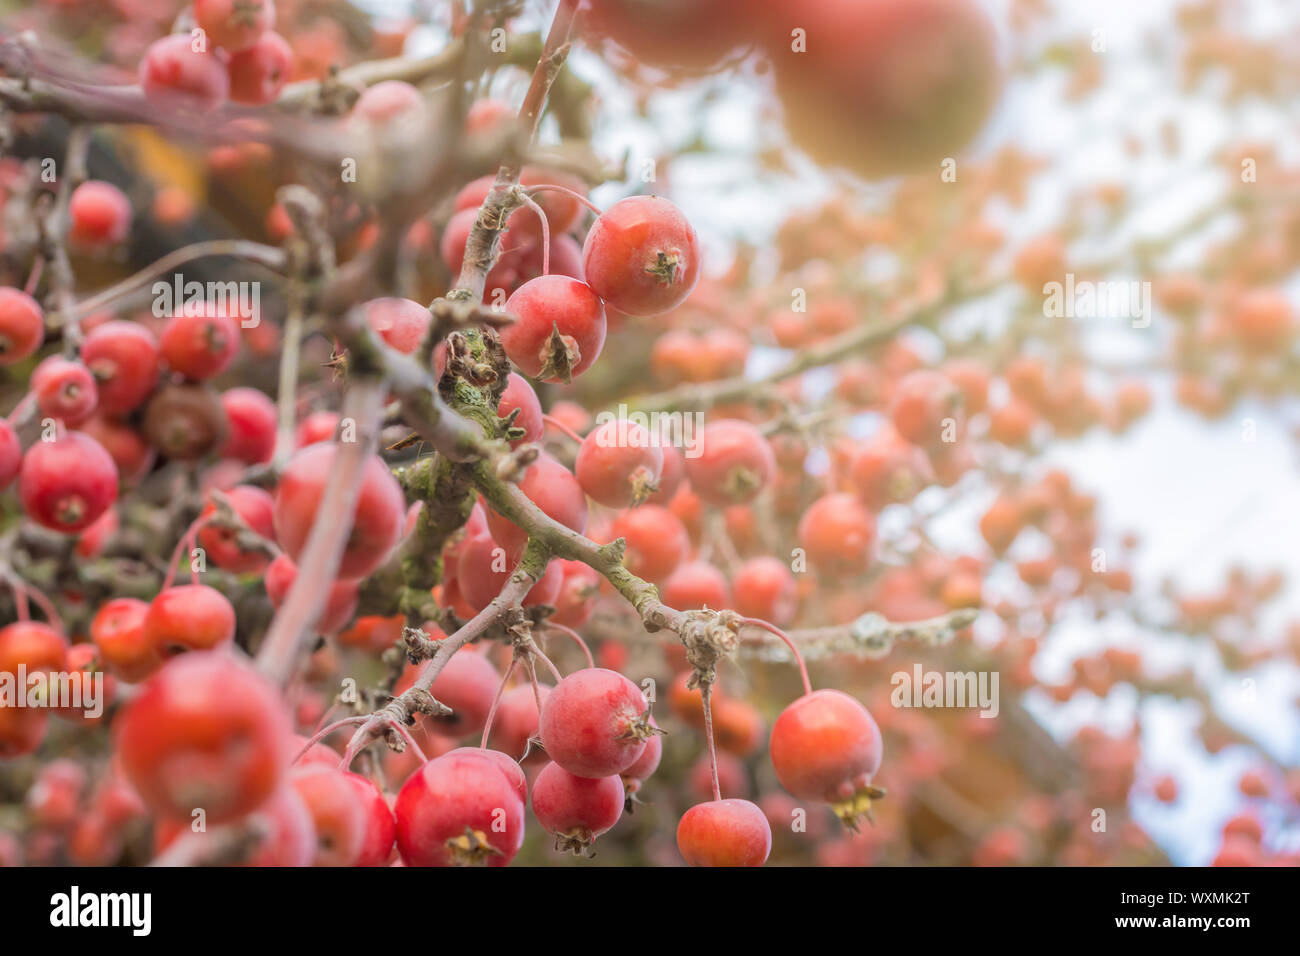 Red fruits of the ornamental apple tree named Malus hybrid Stock Photo